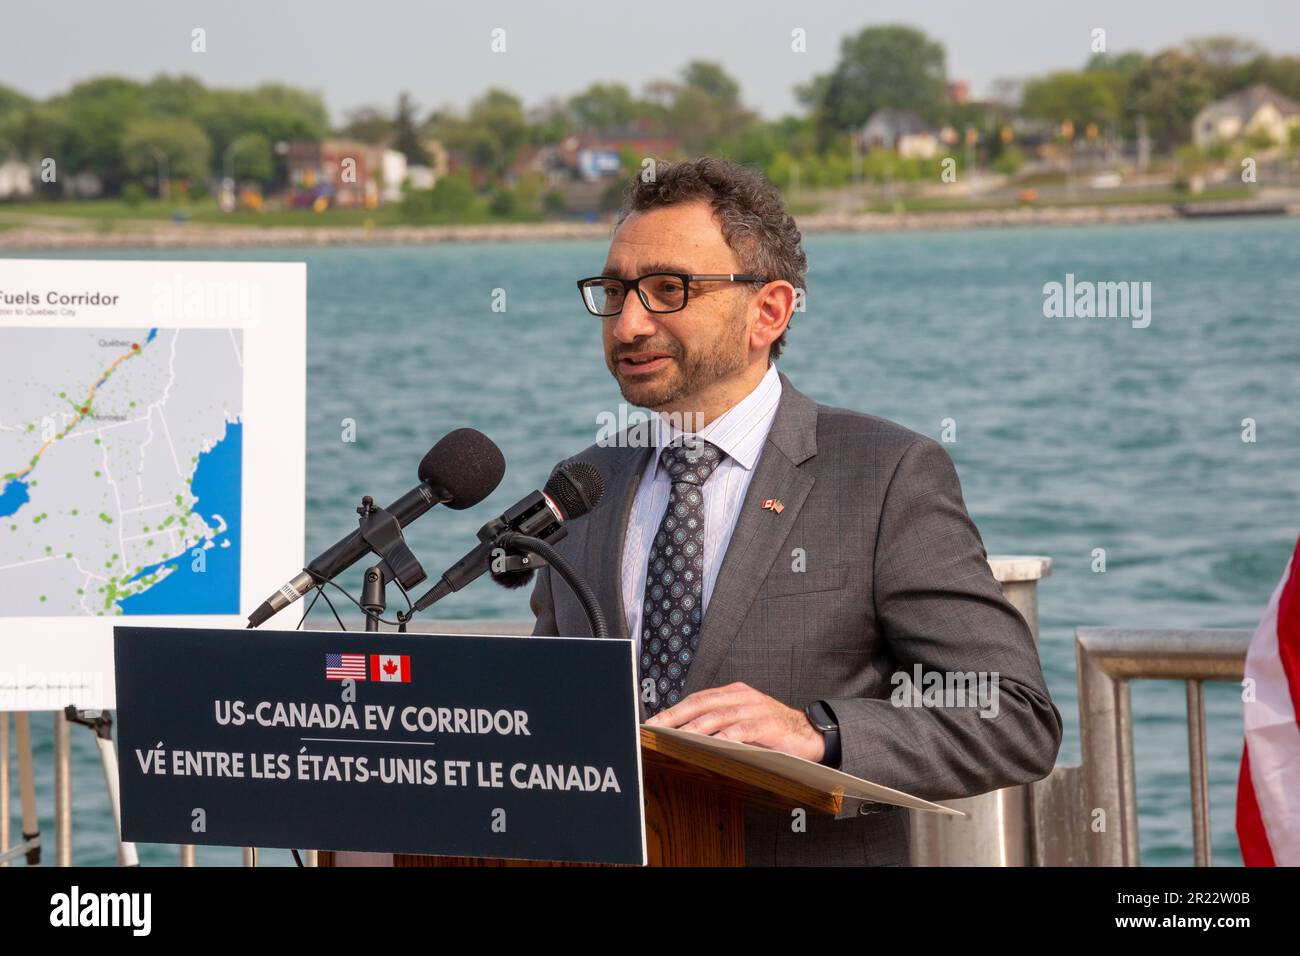 Detroit, Michigan, USA. 16th May, 2023. The United States and Canada announced plans for a binational electric vehicle corridor, with DC fast charging stations every 50 miles from Kalamazoo, Michigan to Quebec City, Quebec. Making the announcement at a dock on the Detroit River (with Canada across the river) were Canadian Minister of Transport Omar Alghabra and U.S. Transportation Secretary Pete Buttigieg (not pictured). Credit: Jim West/Alamy Live News Stock Photo